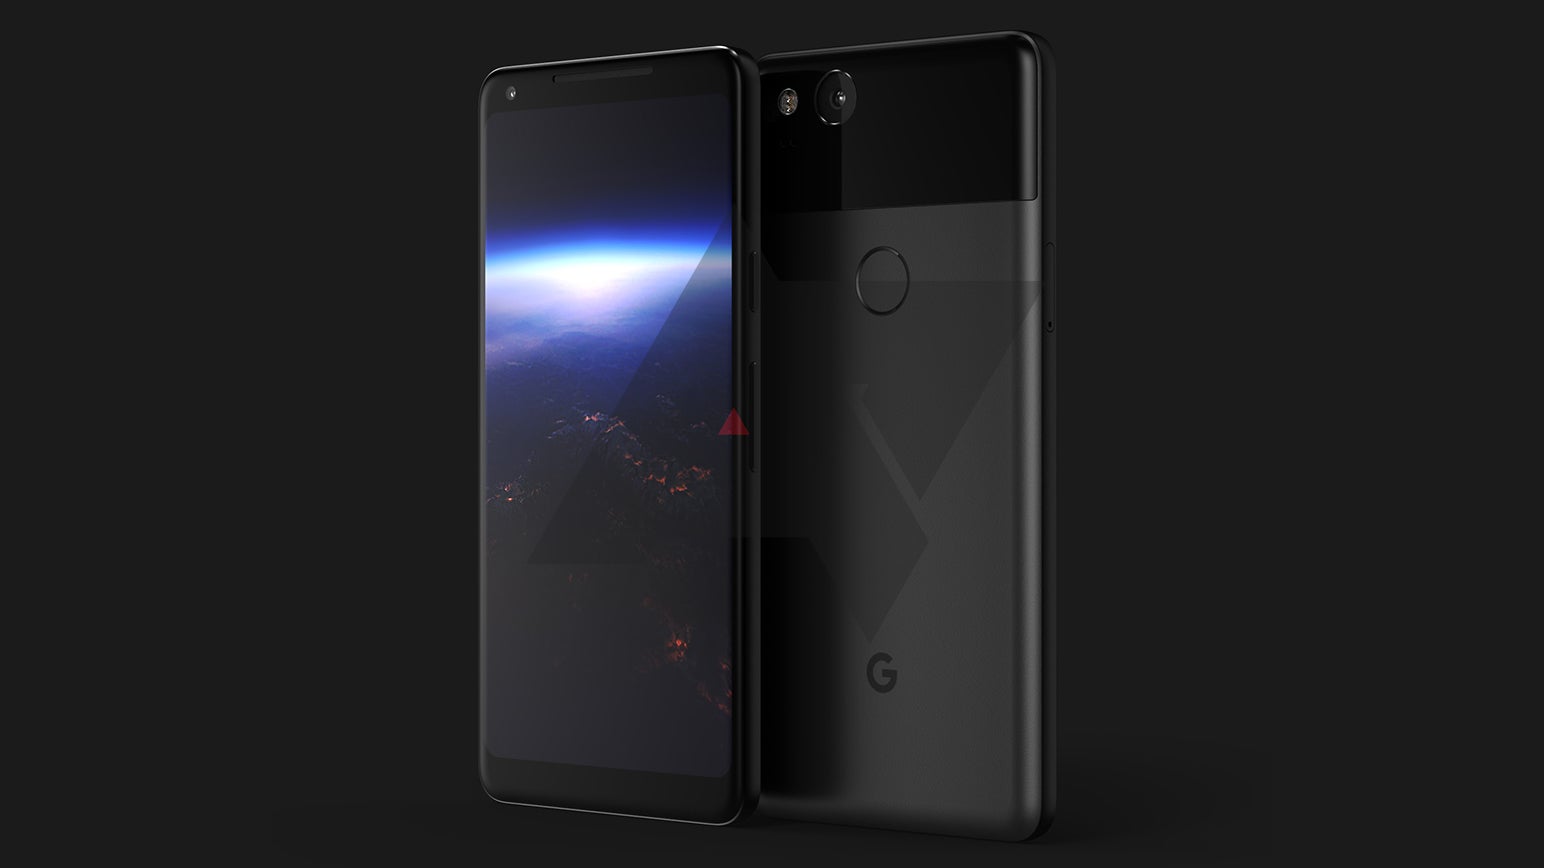 The Pixel XL 2 features a refined design with a tall, nearly bezel-less display - Google Pixel 2 and Pixel XL 2: price and release date predictions